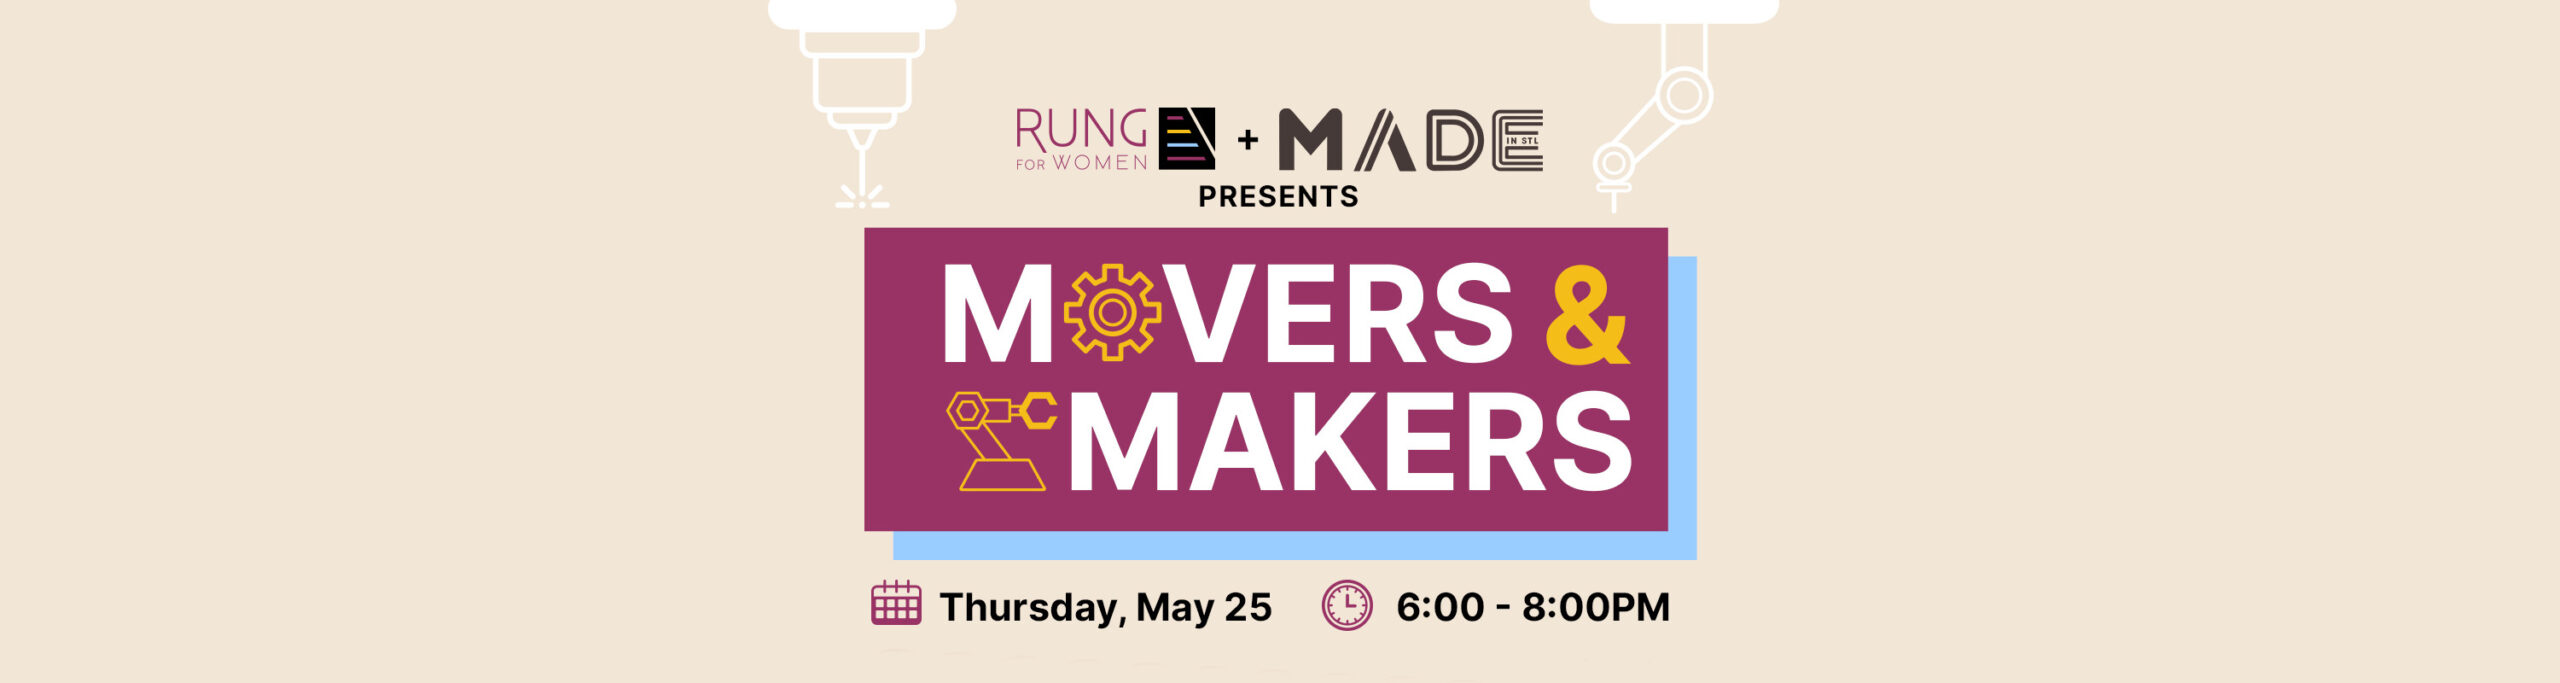 Movers & Makers Event Thursday, May 25